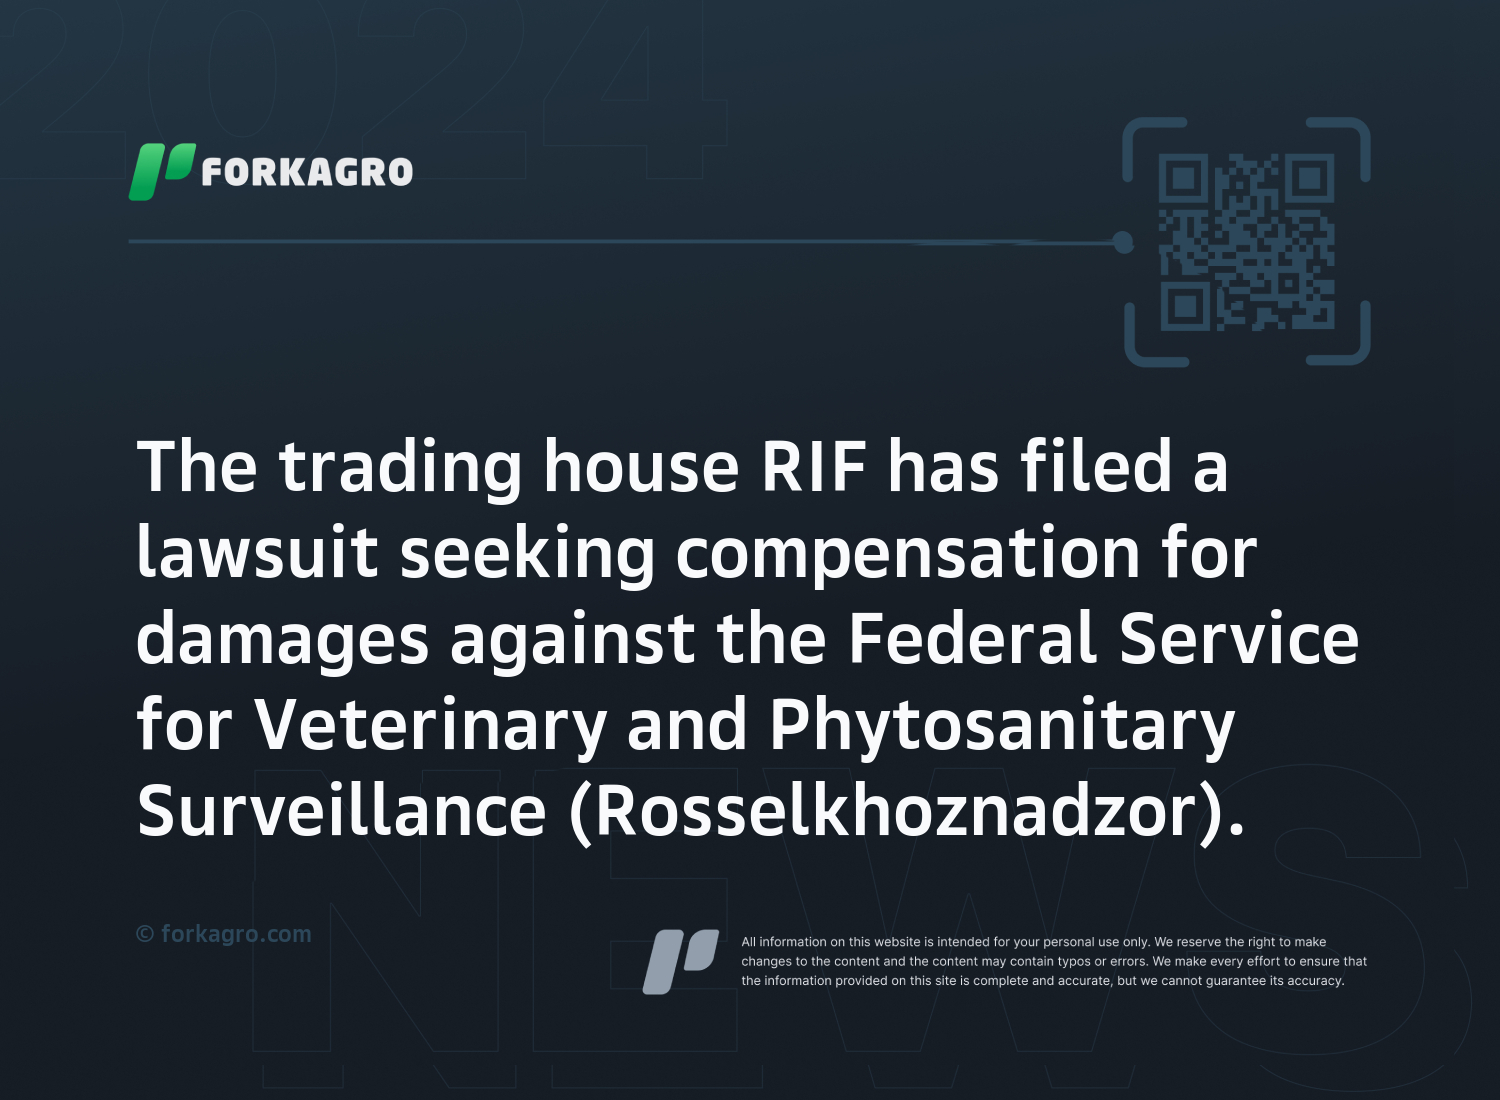 The trading house RIF has filed a lawsuit seeking compensation for damages against the Federal Service for Veterinary and Phytosanitary Surveillance (Rosselkhoznadzor).